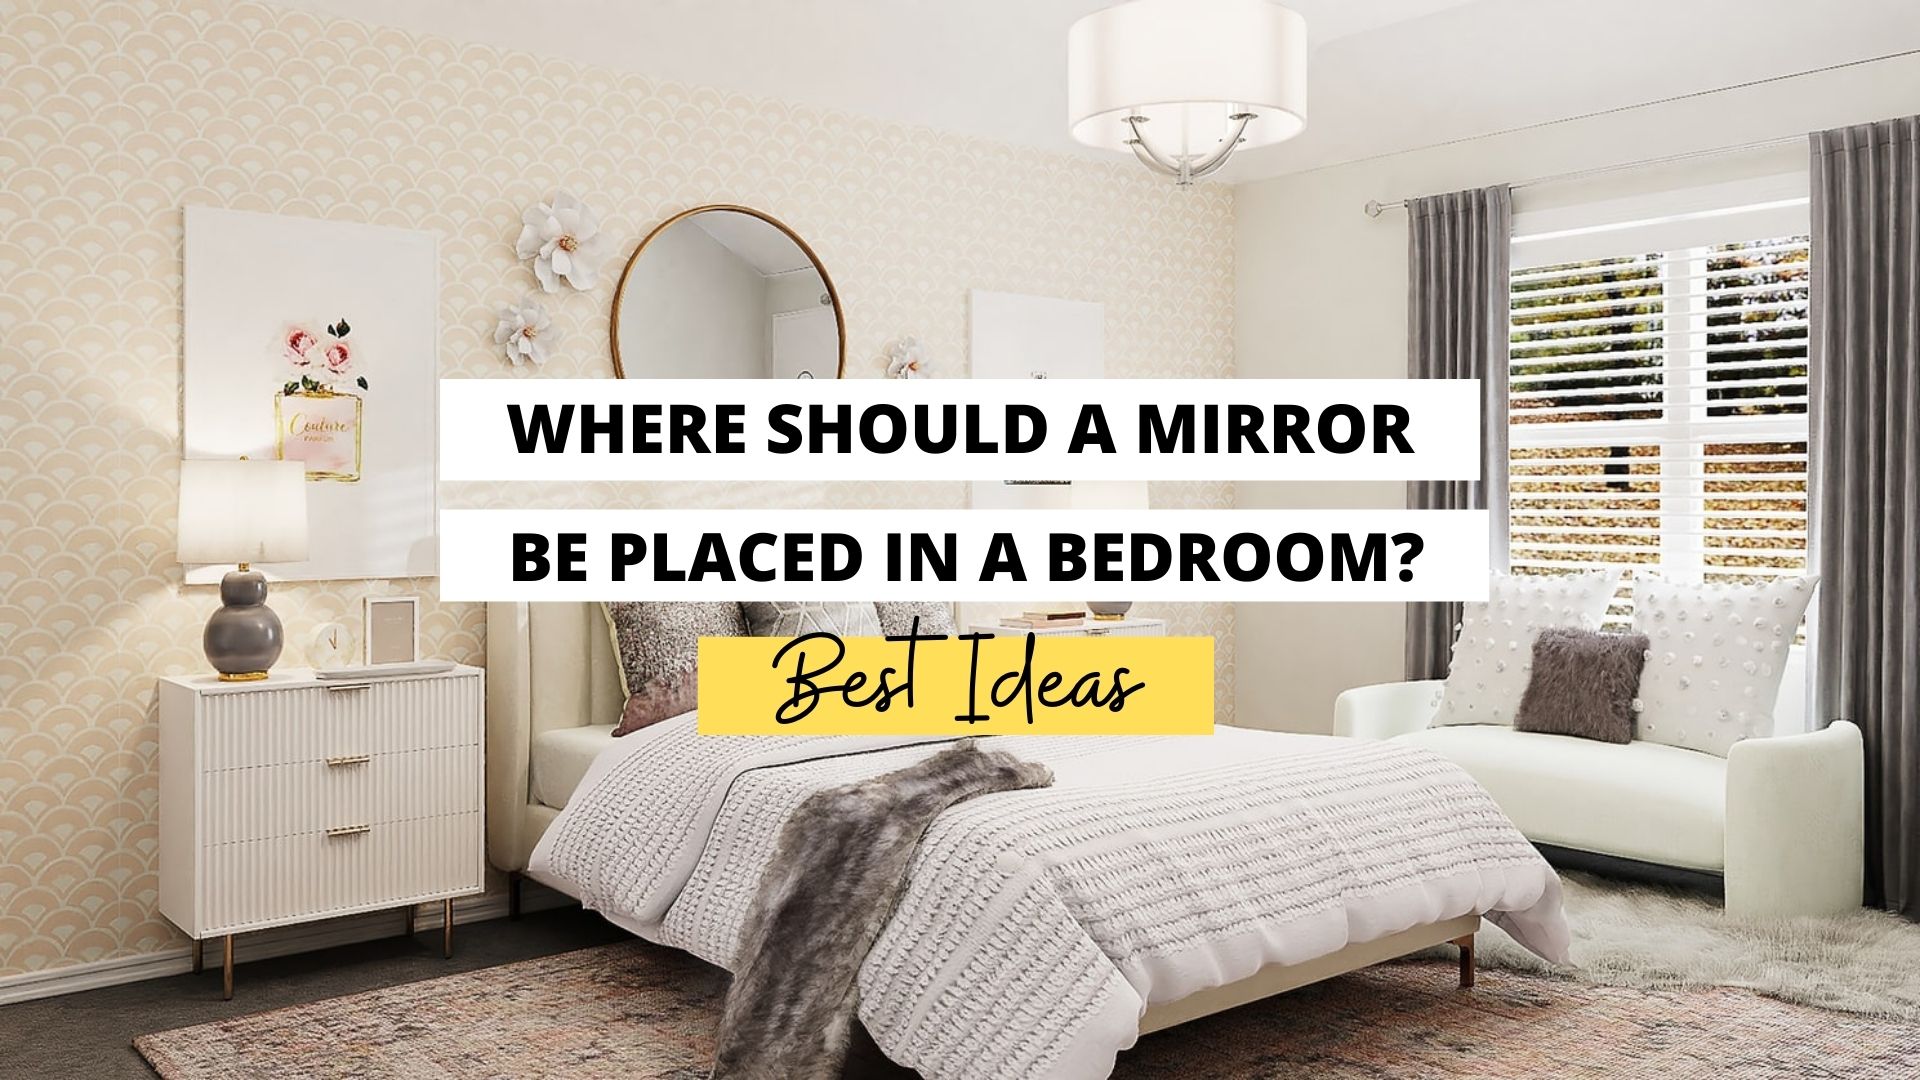 A Mirror Be Placed In Bedroom, Can Mirror Be Placed On Northwest Wall